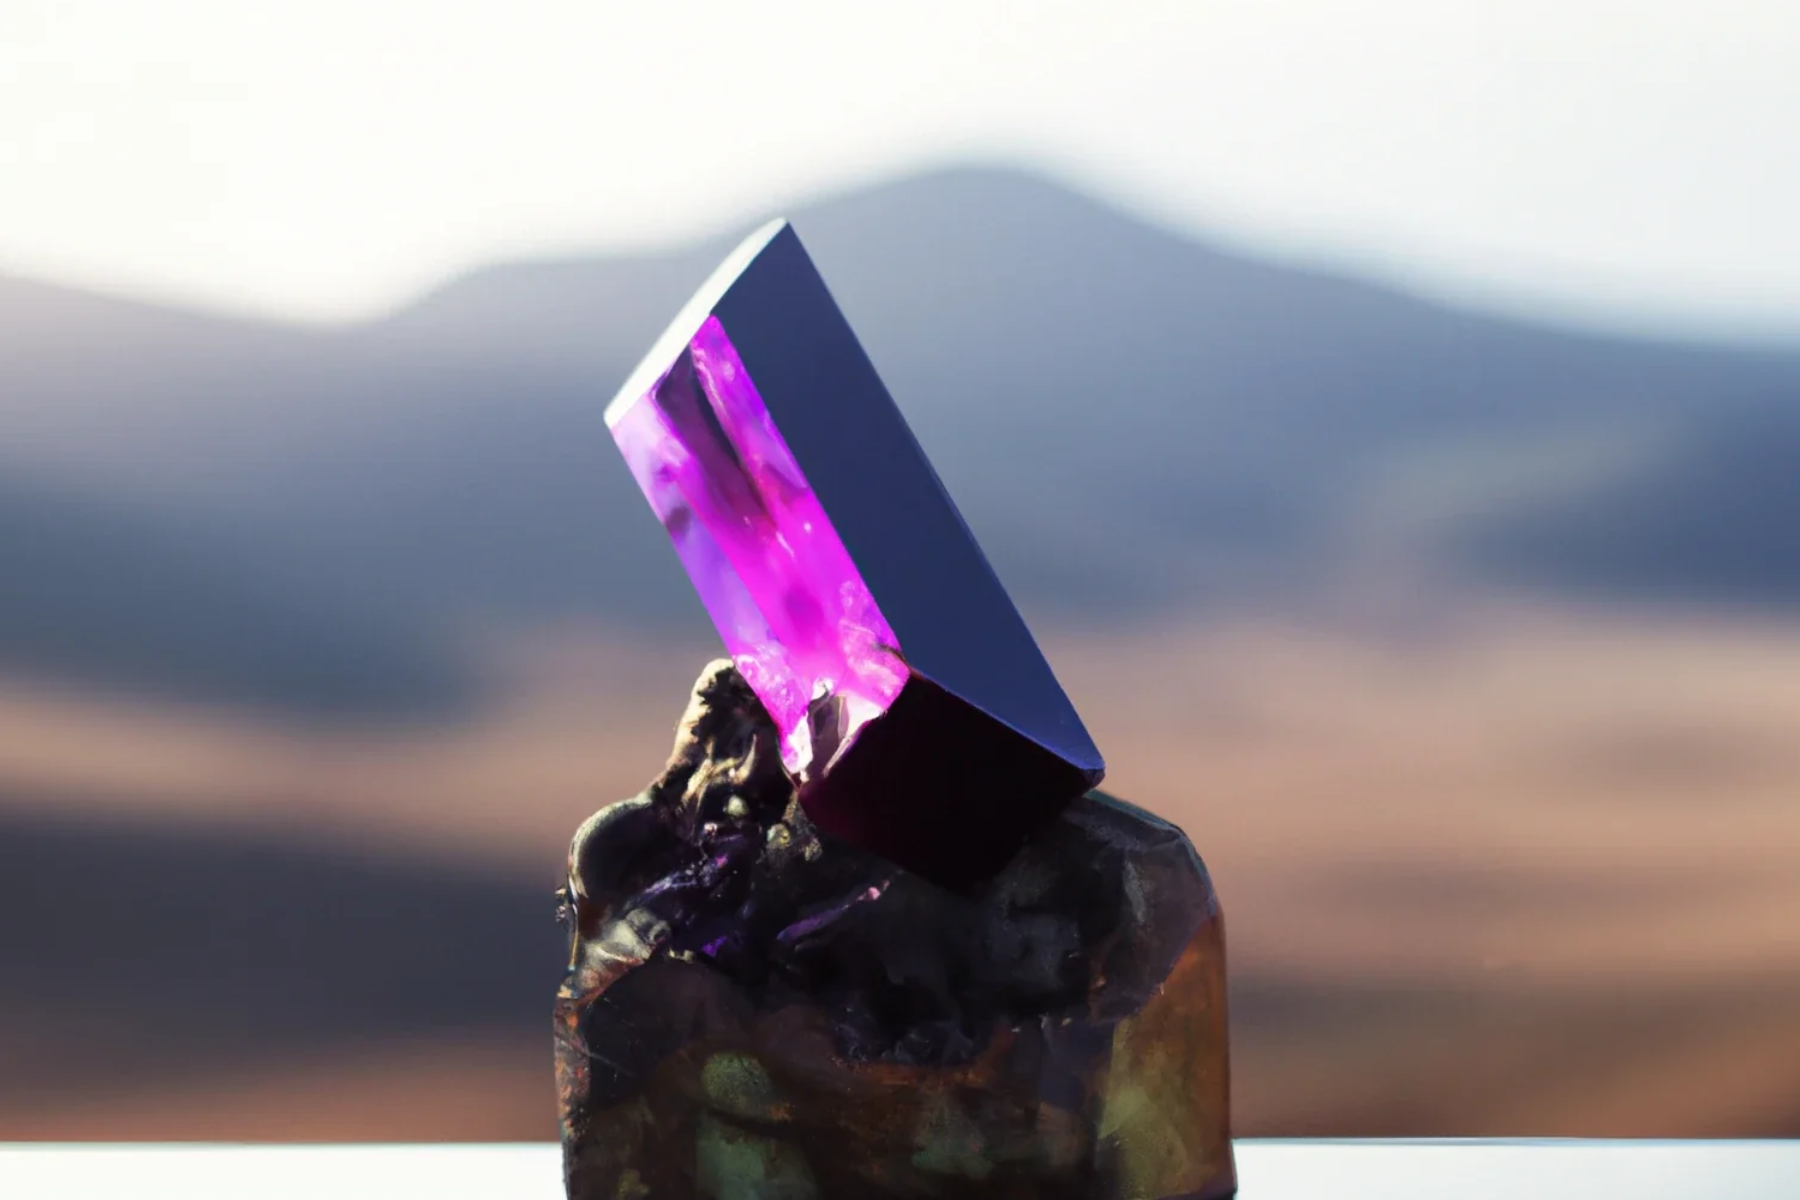 An amethyst sticking to its host rock